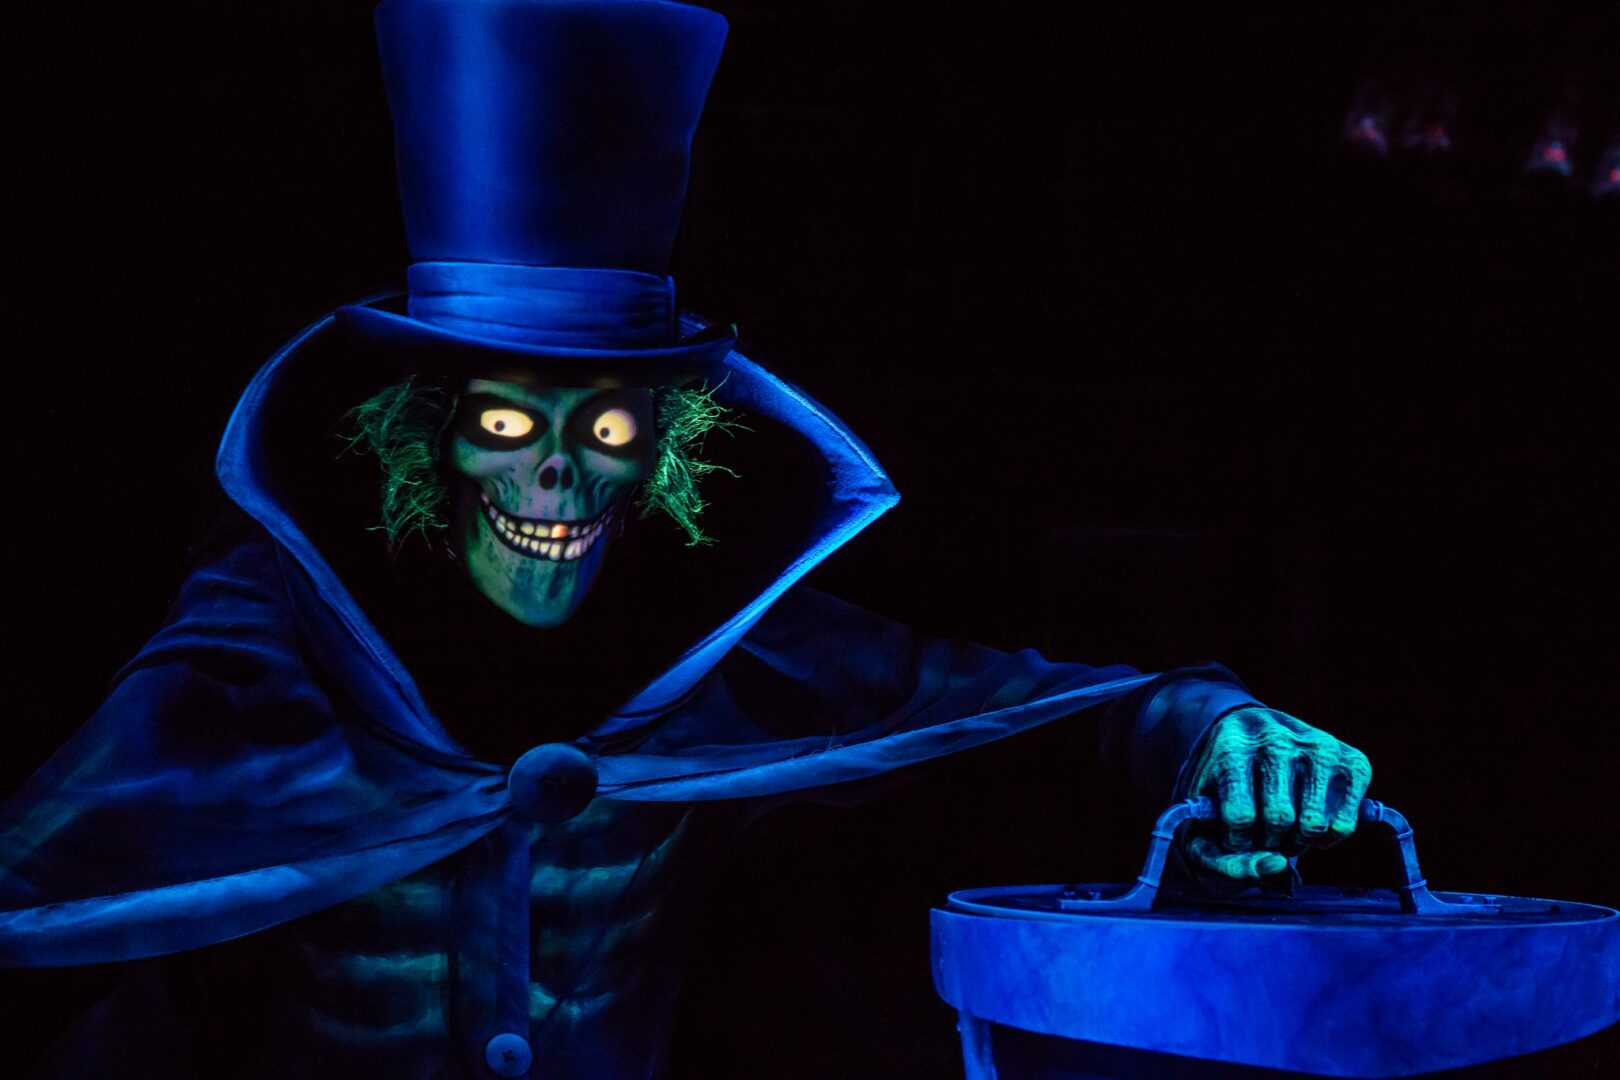 First Look at the Hatbox Ghost Coming to the Haunted Mansion in the Magic Kingdom